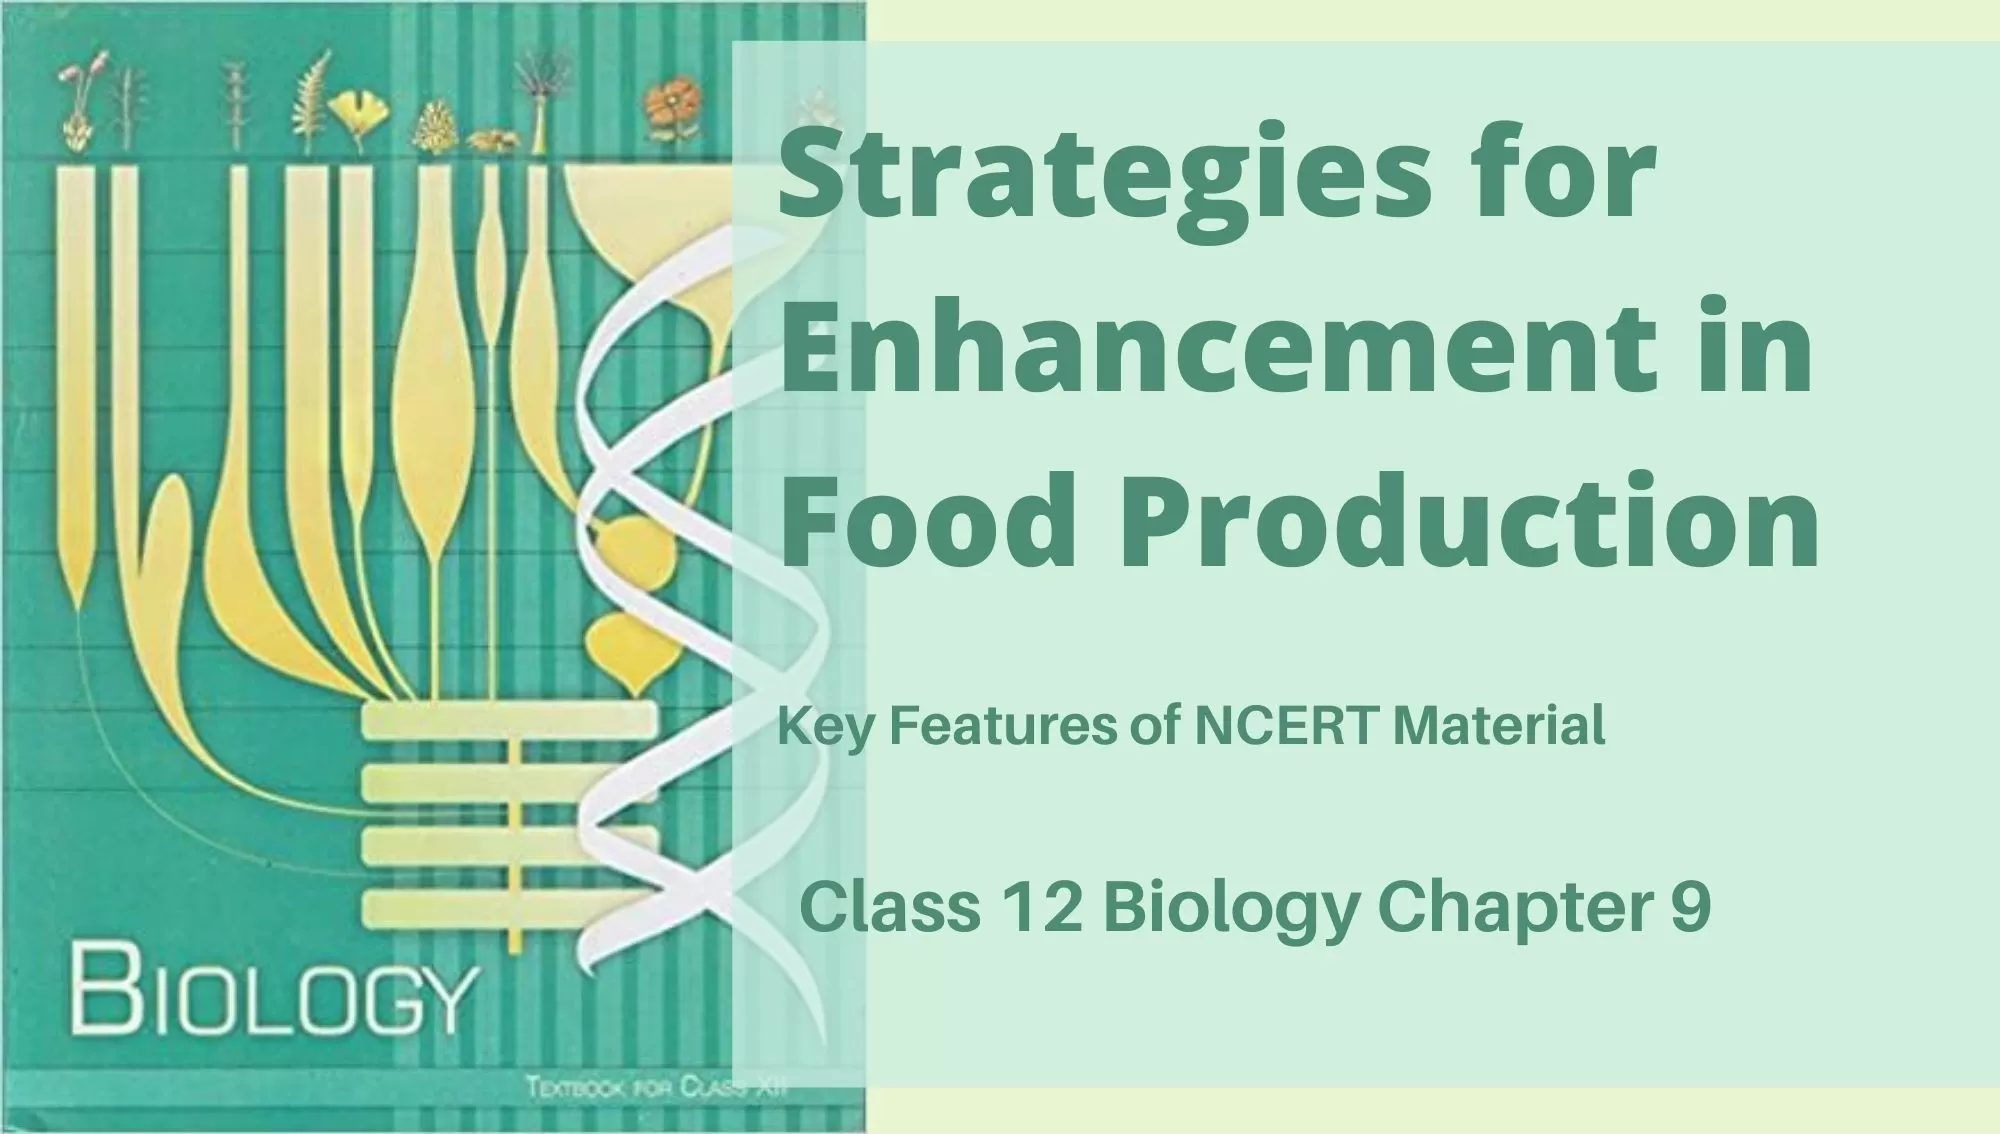 Strategies for Enhancement in Food Production Class 12 Biology NCERT  Chapter 9 - Reeii Education